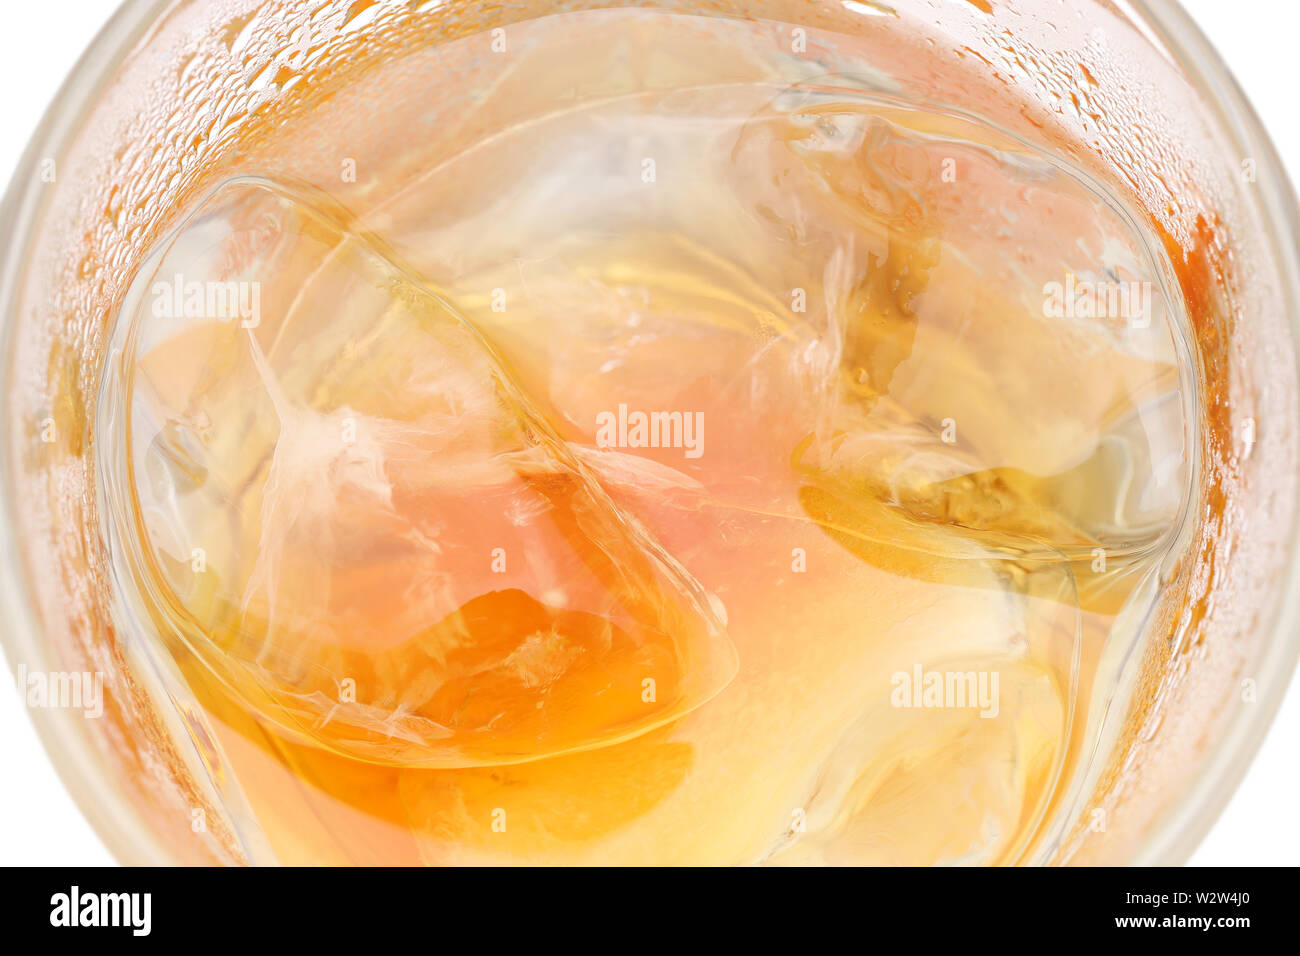 Whiskey or whisky in rocks glass isolated on white background Stock Photo